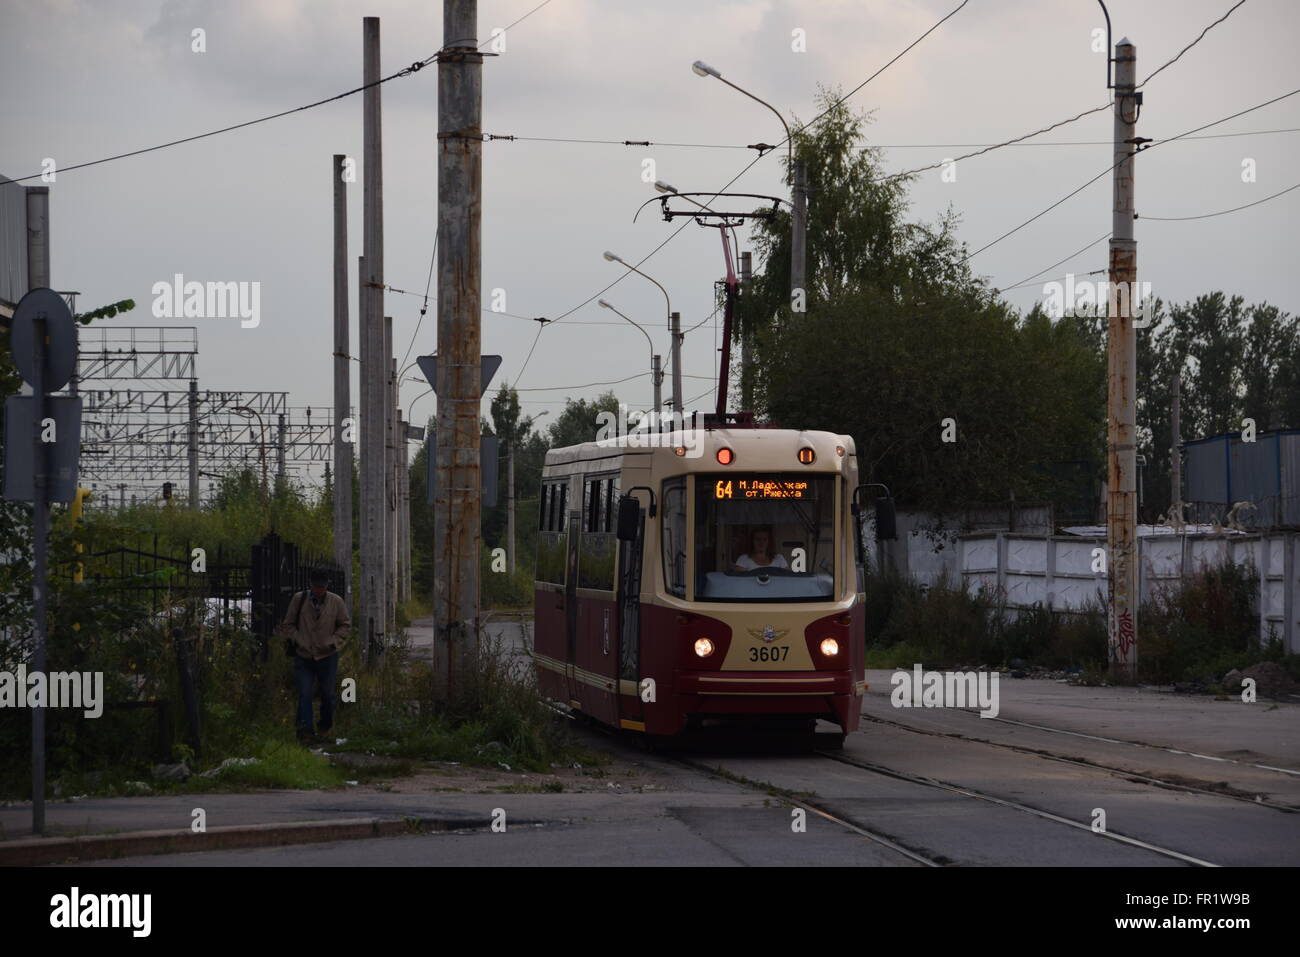 A reconstructed solo LM-68M2 tram car entering the Ladozhsky Railway Station's tram hub area Stock Photo